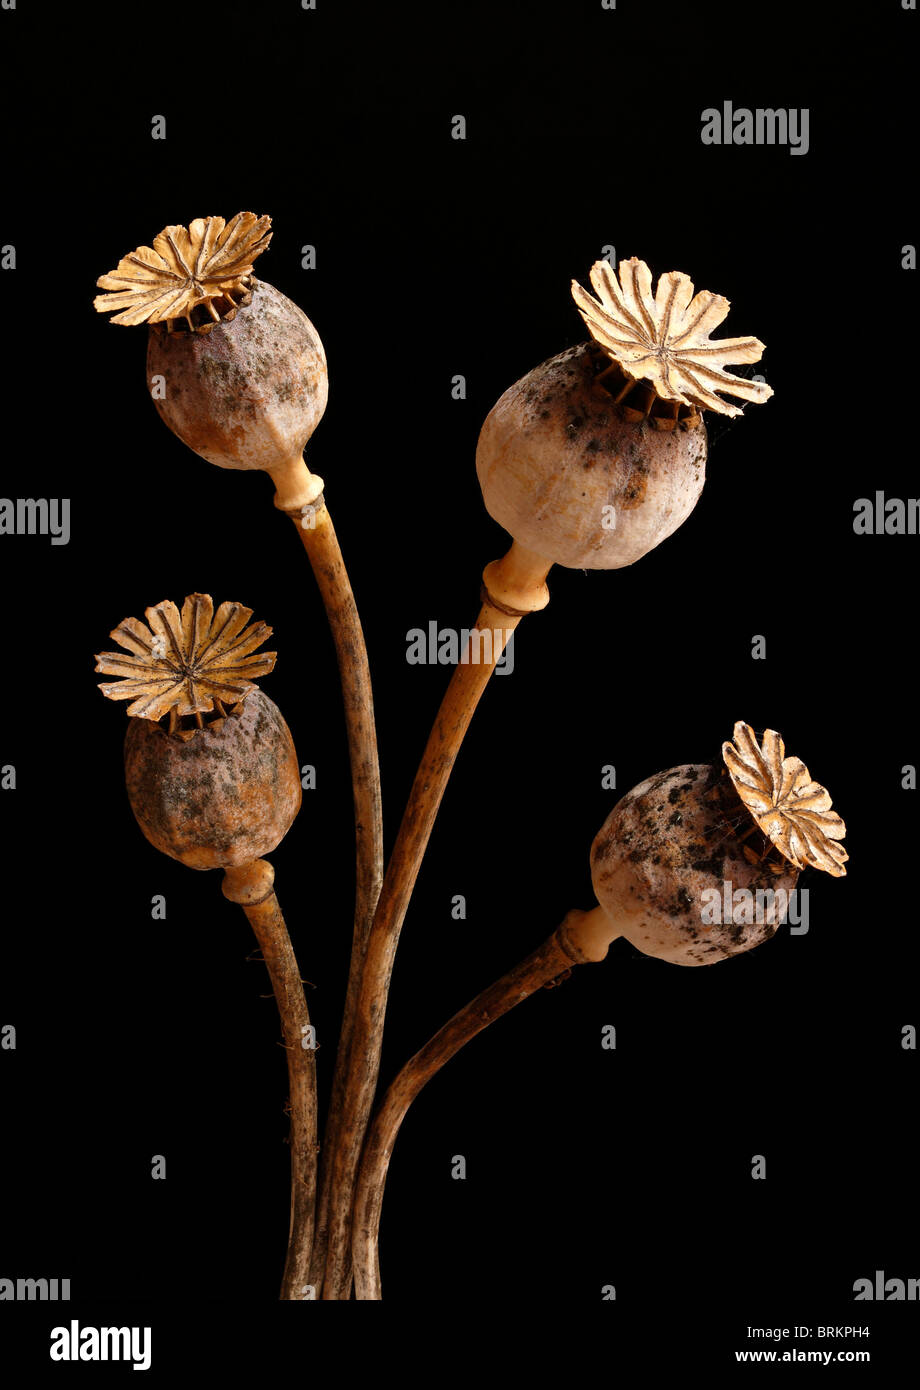 Arrangement of four old dried poppy seed heads with mildew spots against a dark black background Stock Photo